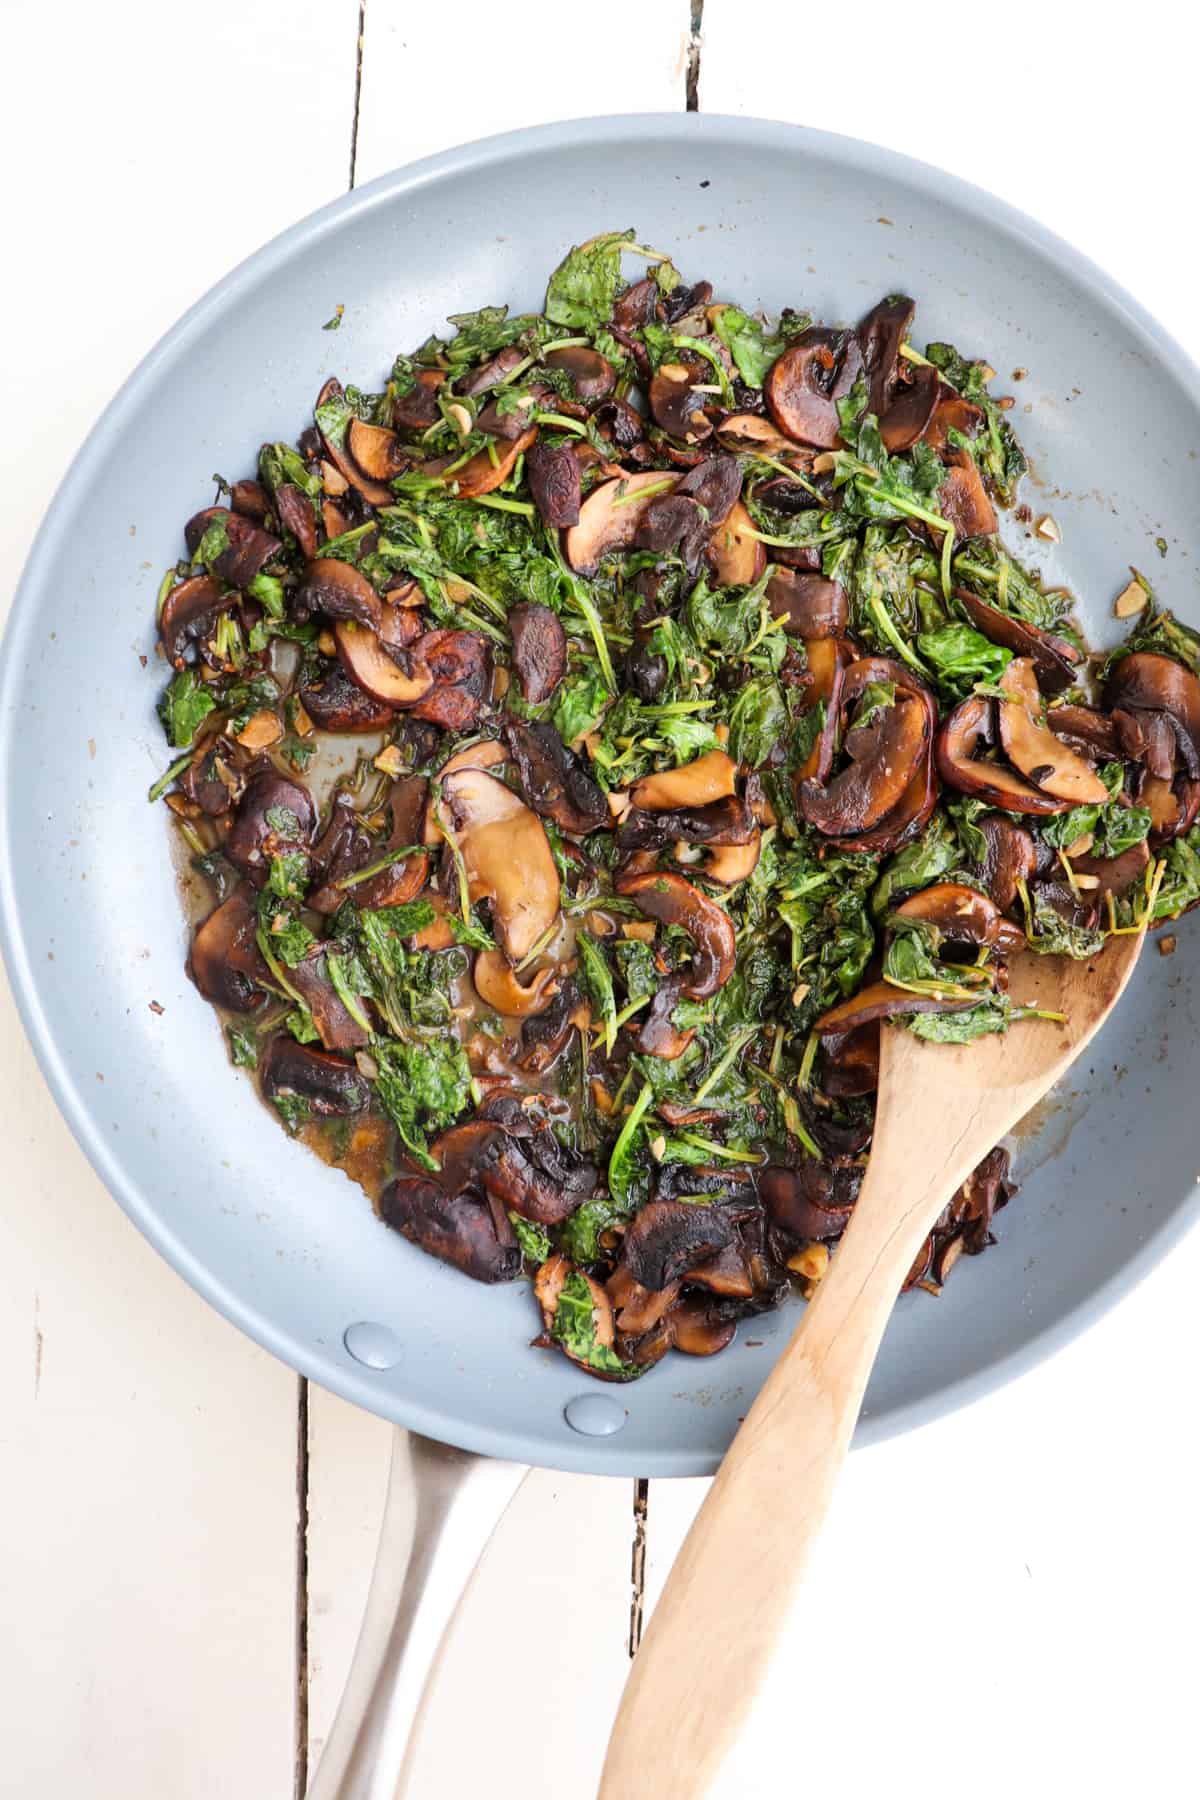 sauteed mushrooms and kale in a pan with a wooden spoon.